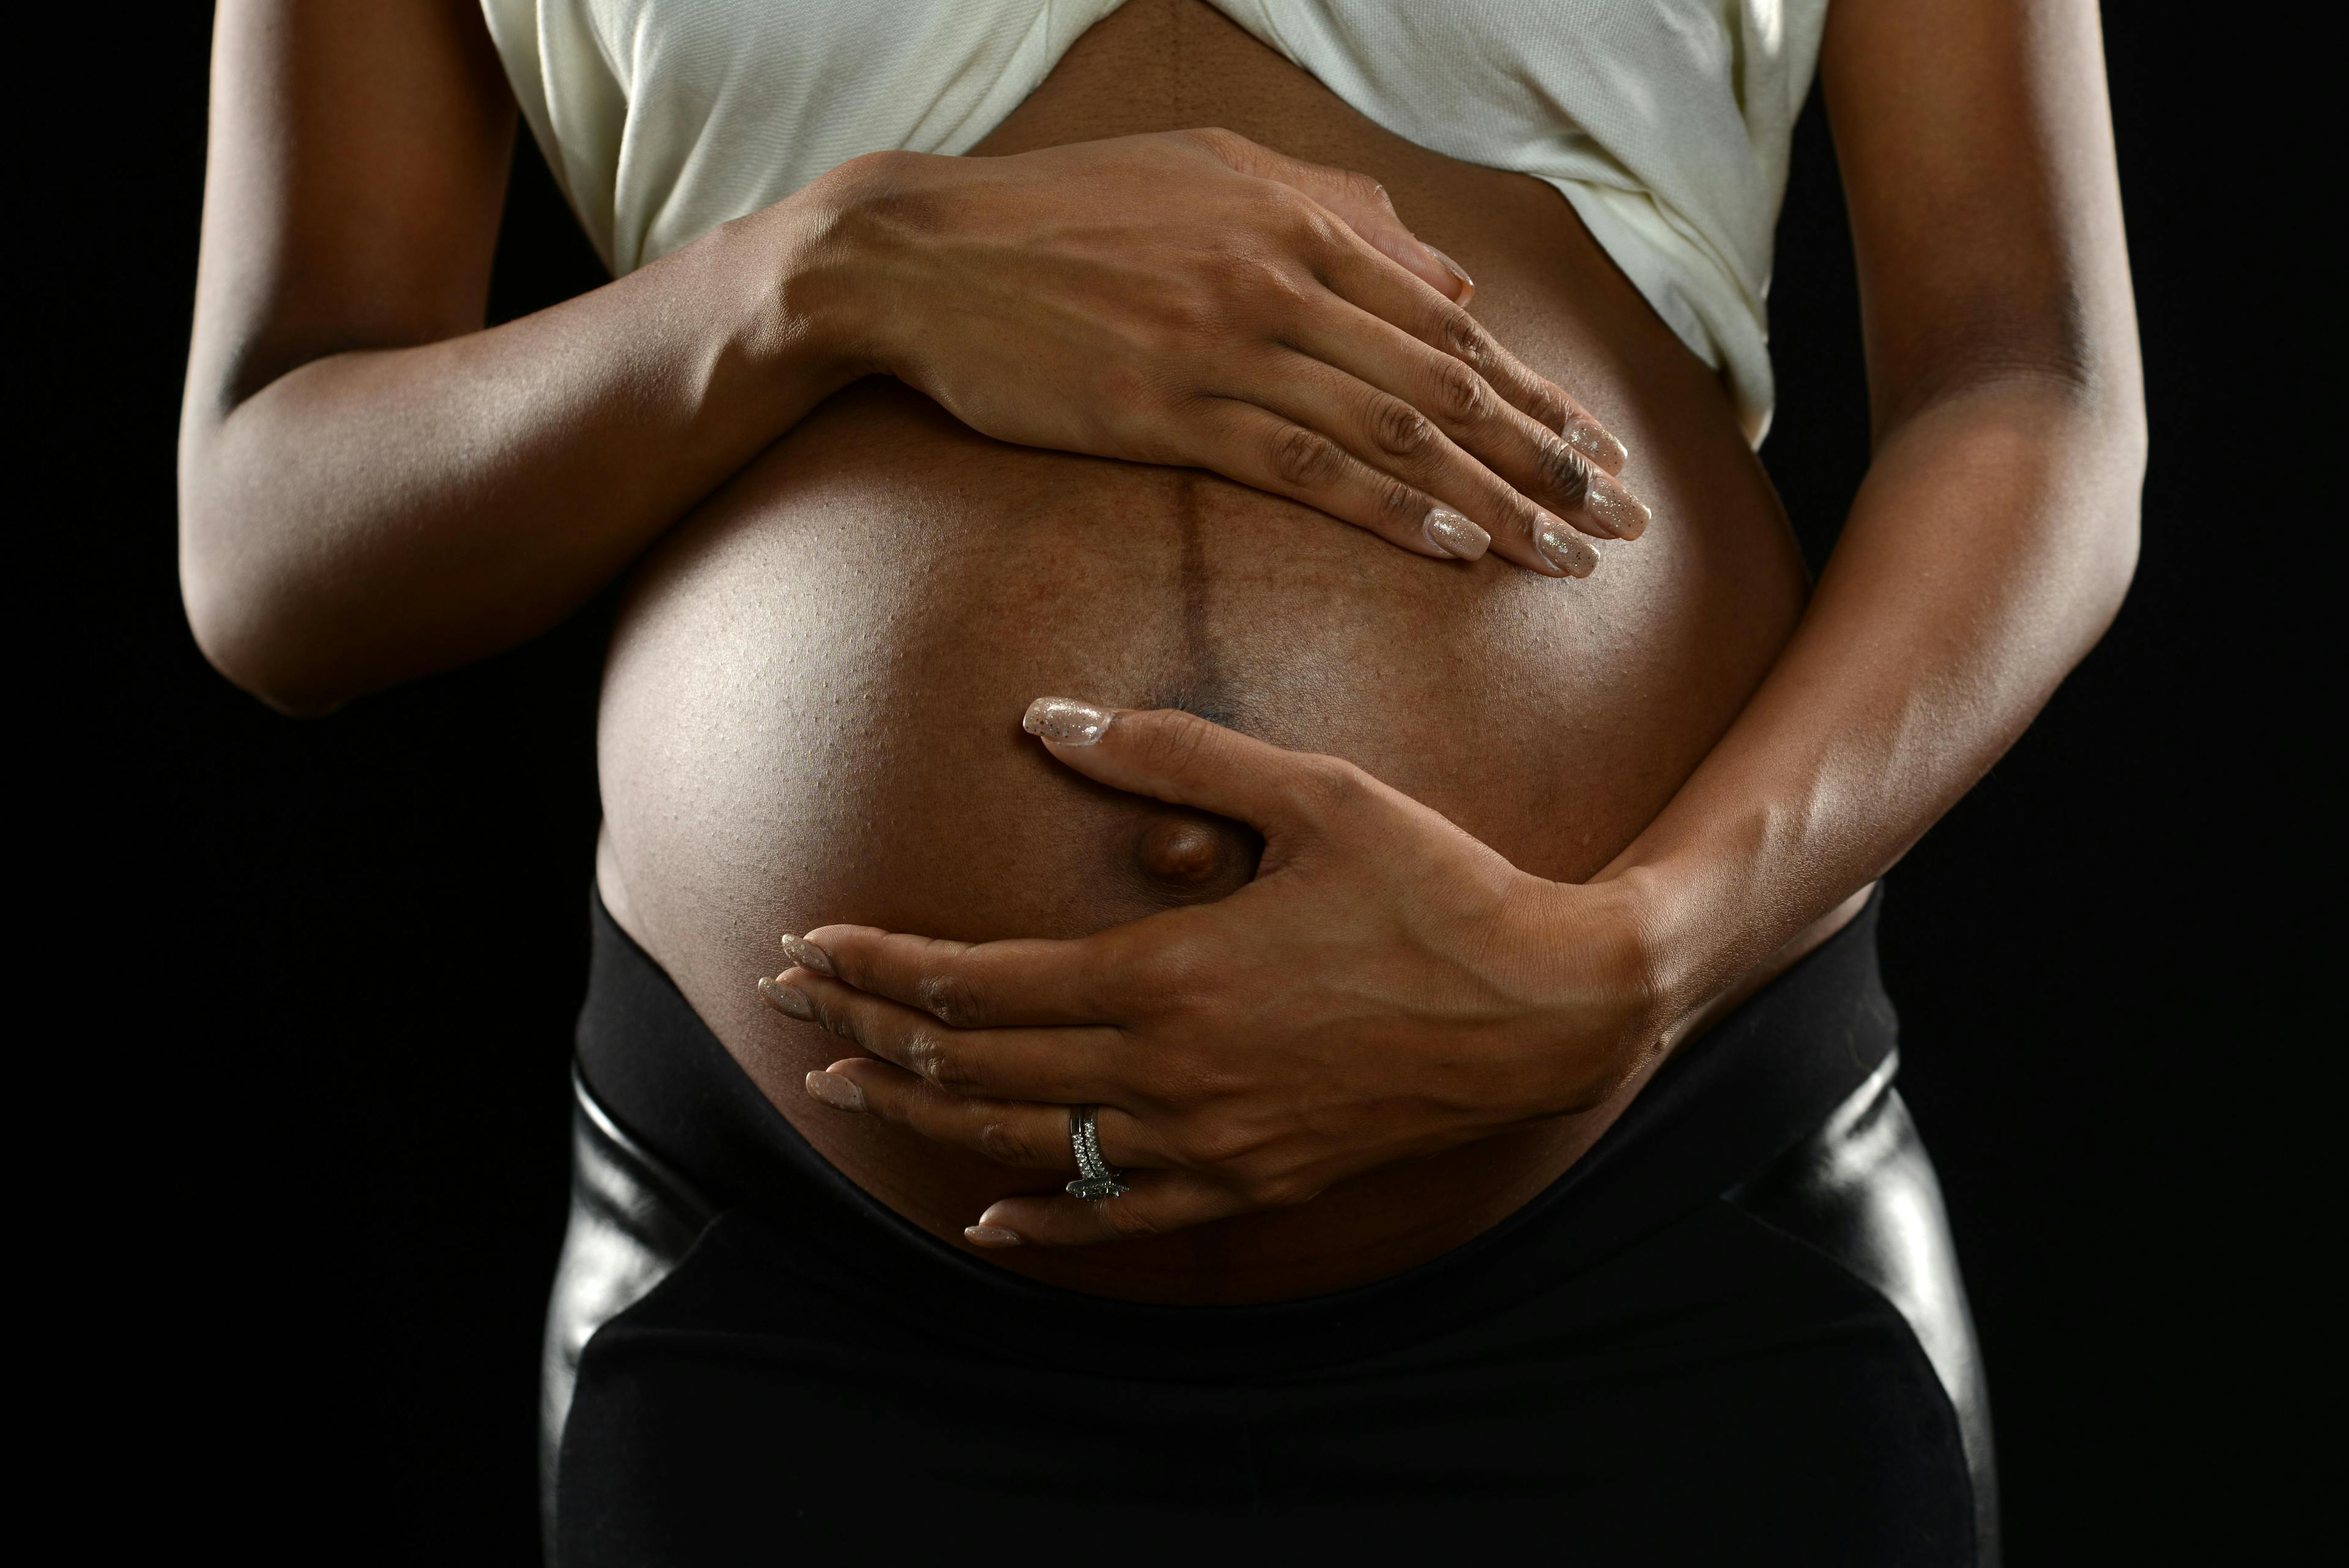 Racial and ethnic disparities in maternal and infant health